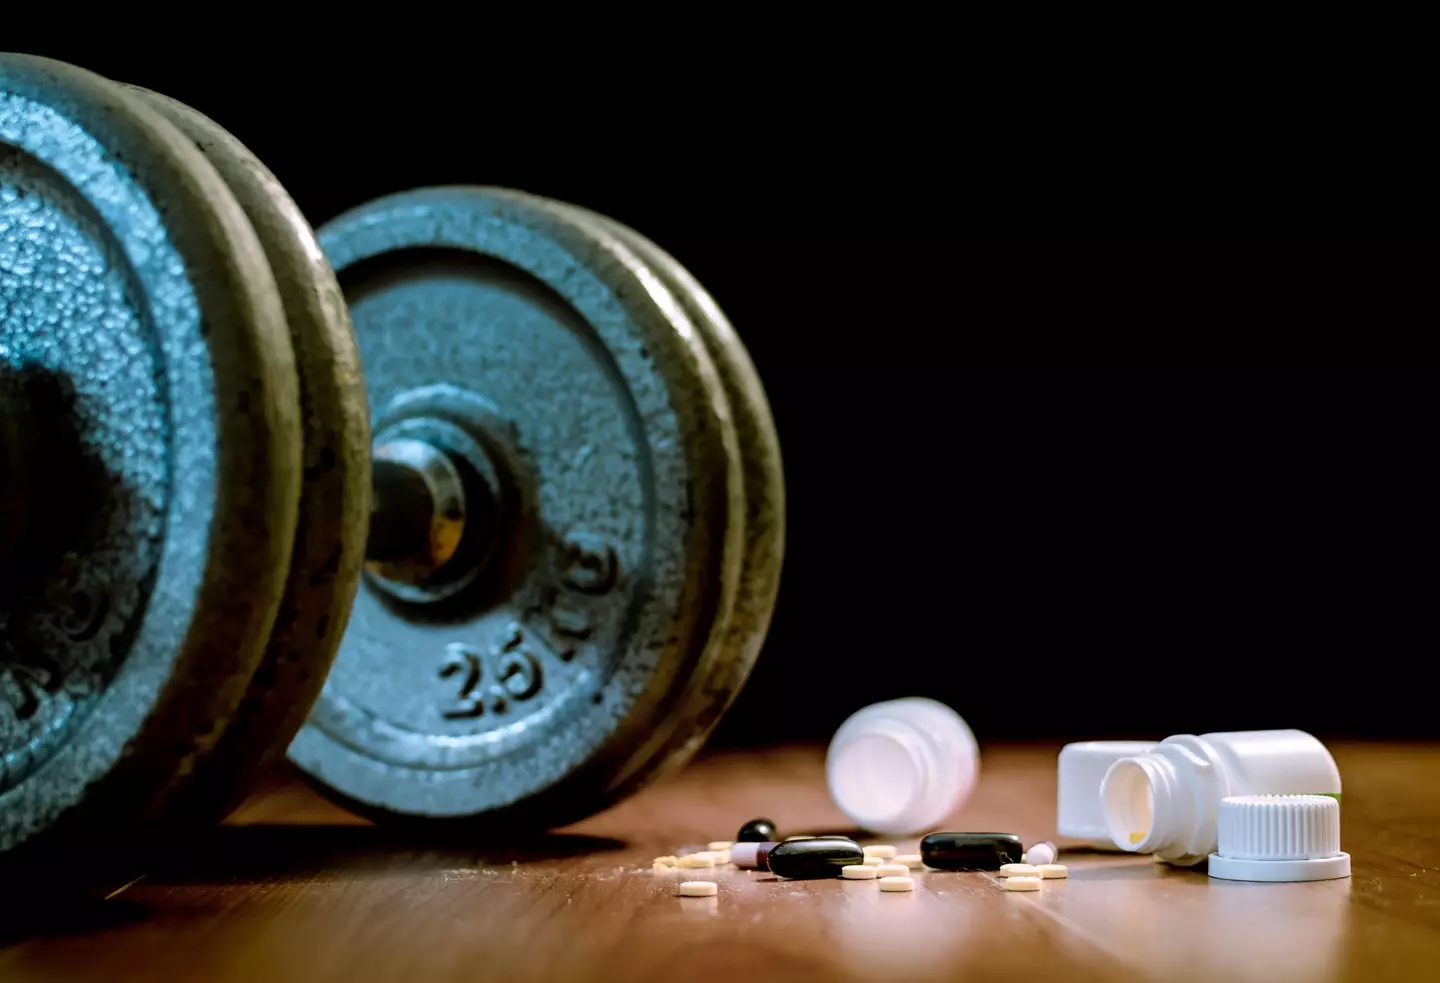 Anabolic steroid-use can also negatively impact testosterone levels.